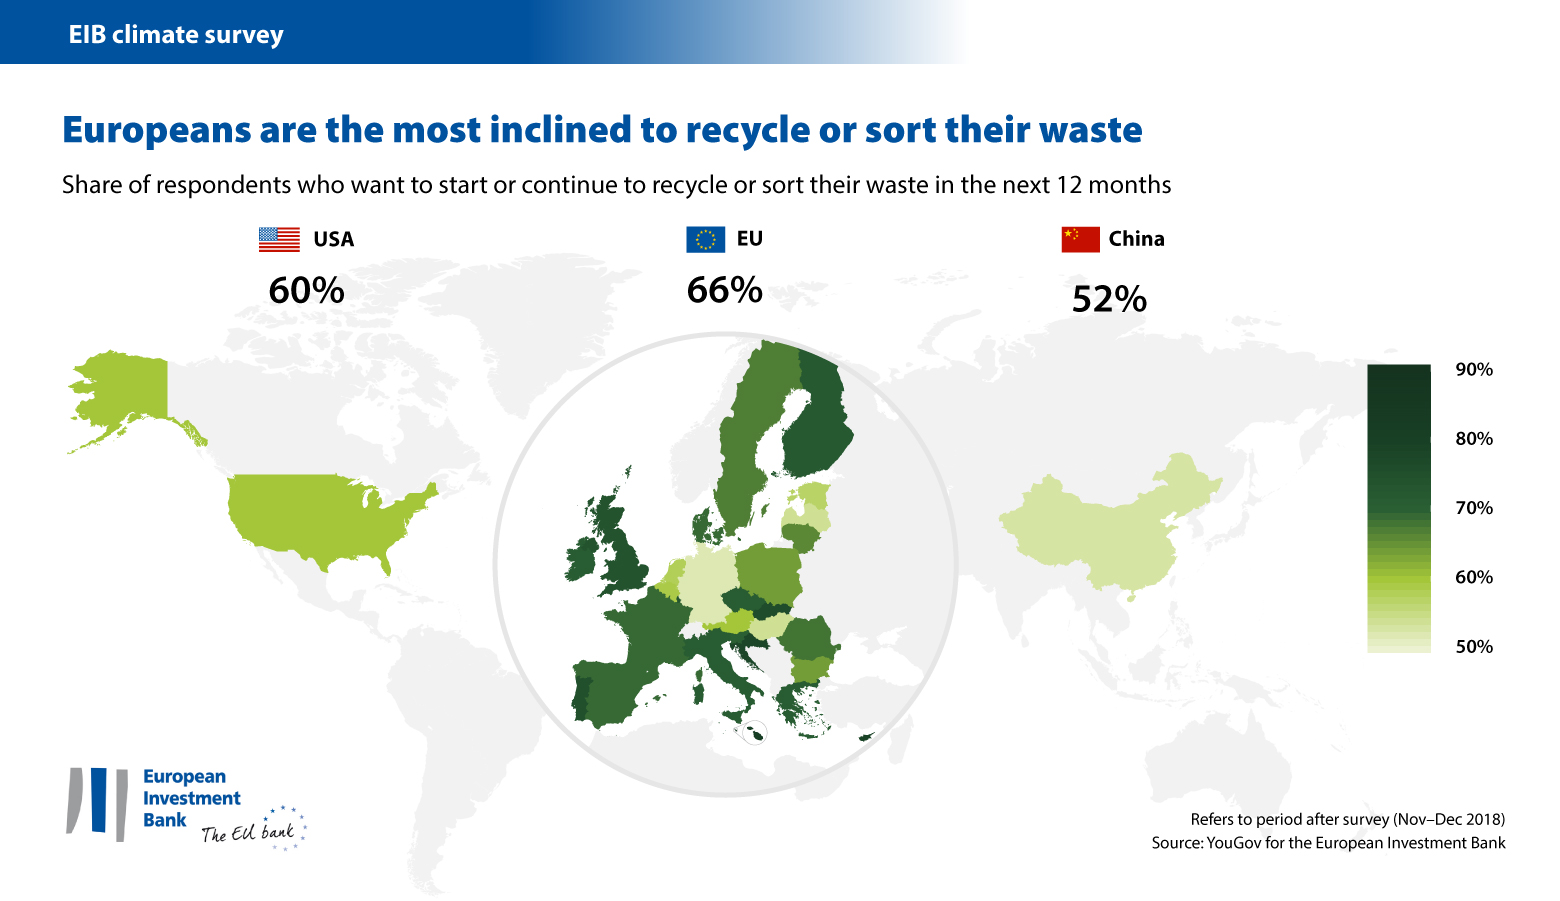 Europeans are the most inclined to recycle or sort their waste